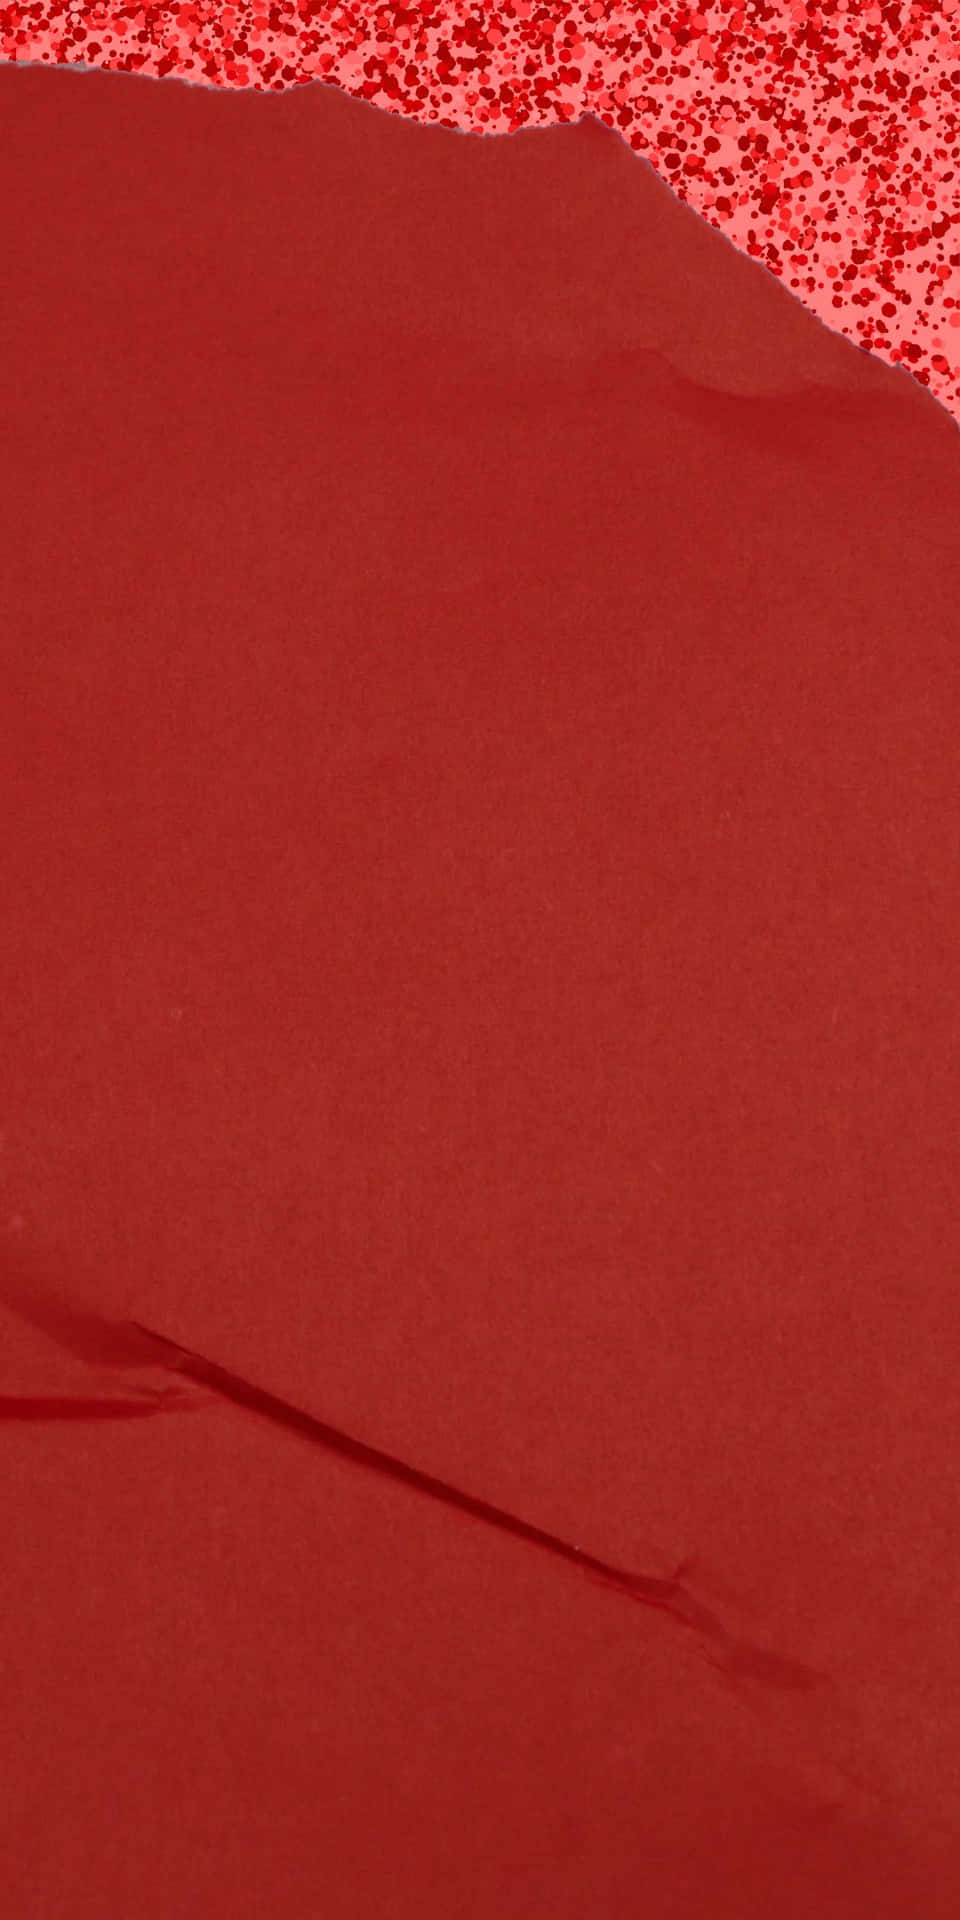 Paper Red Texture Background